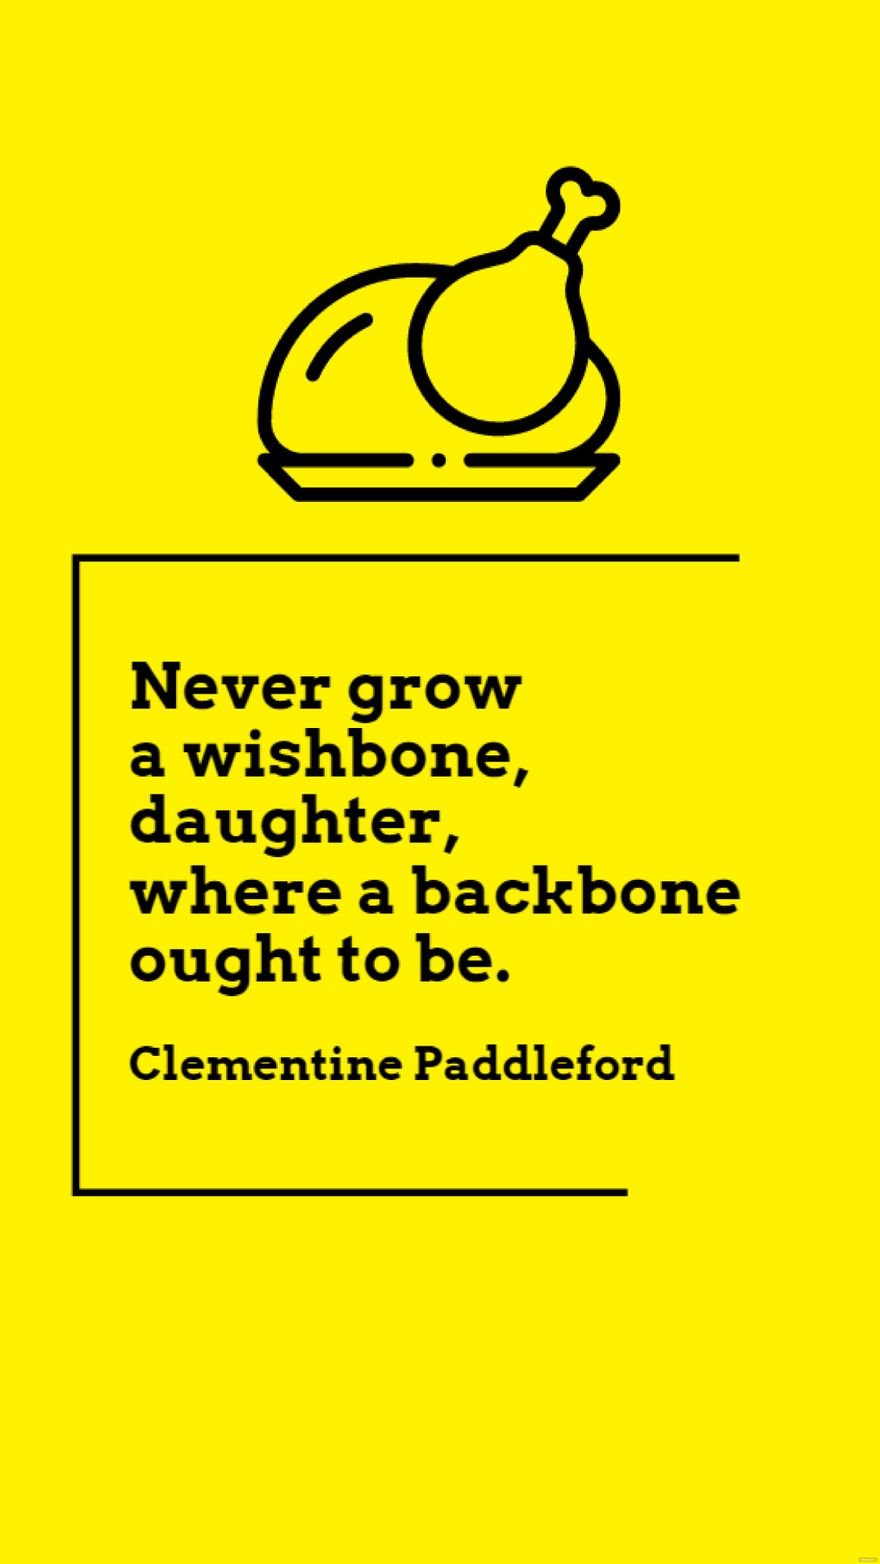 Free Clementine Paddleford - Never grow a wishbone, daughter, where a backbone ought to be. in JPG